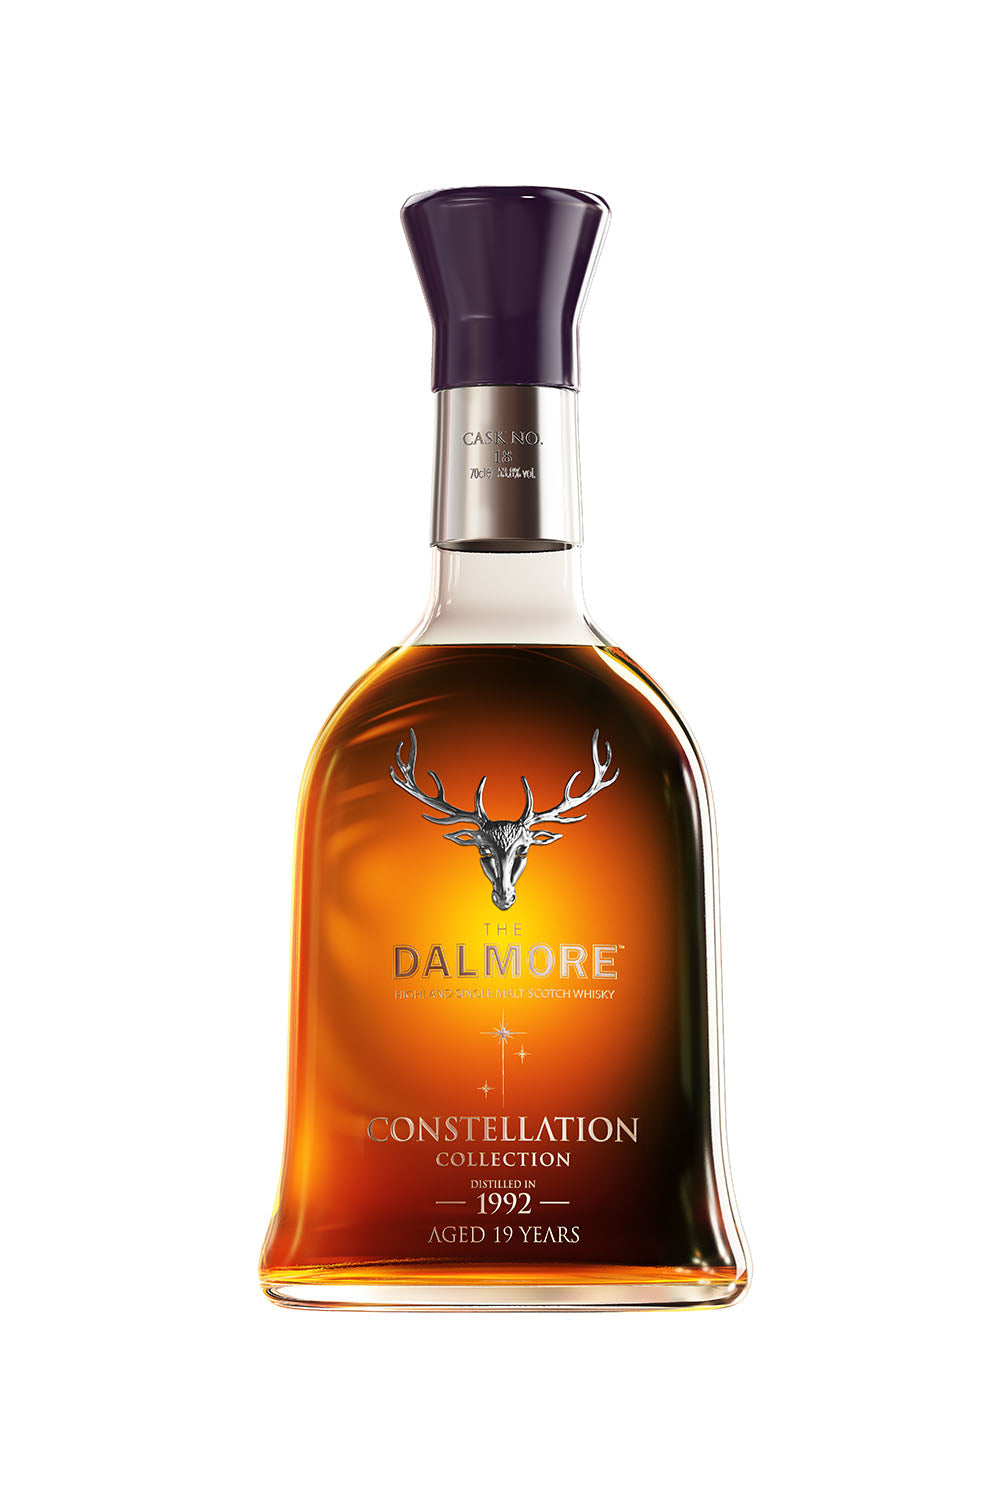 The Dalmore 1992 Constellation - Cask 18